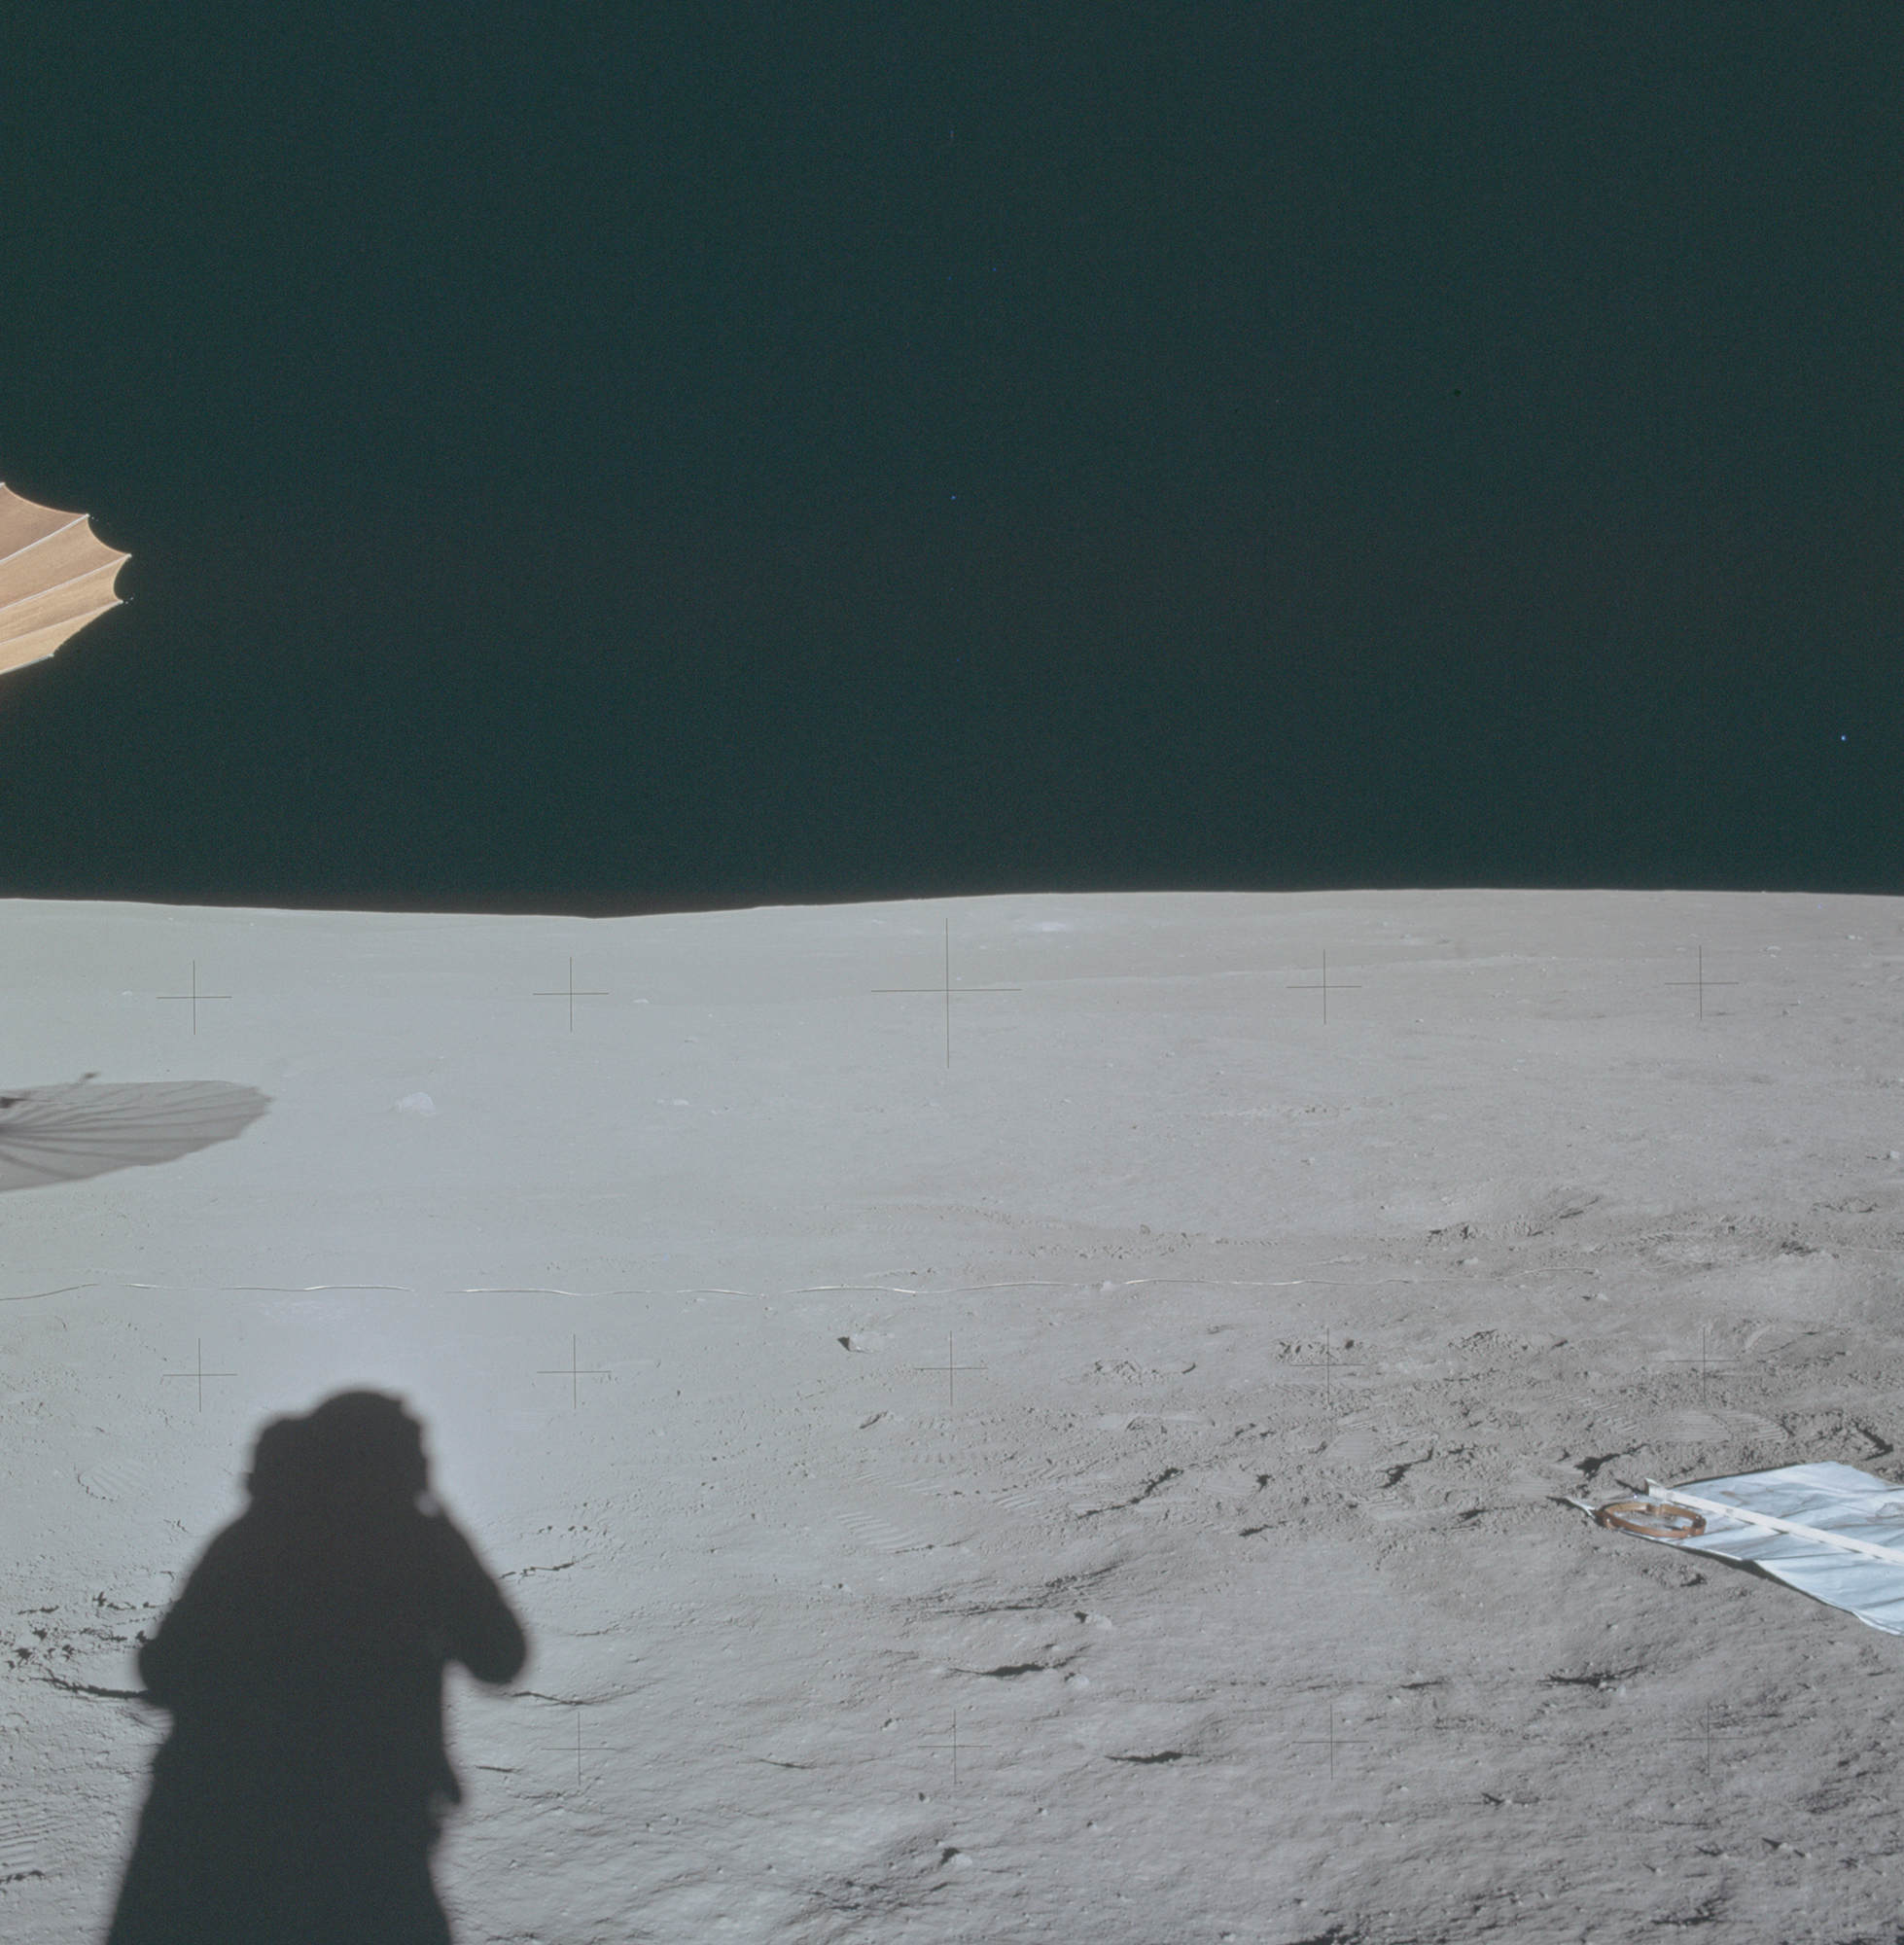 apollo-14-showing-the-s-band-antenna-cover-on-moon.jpg